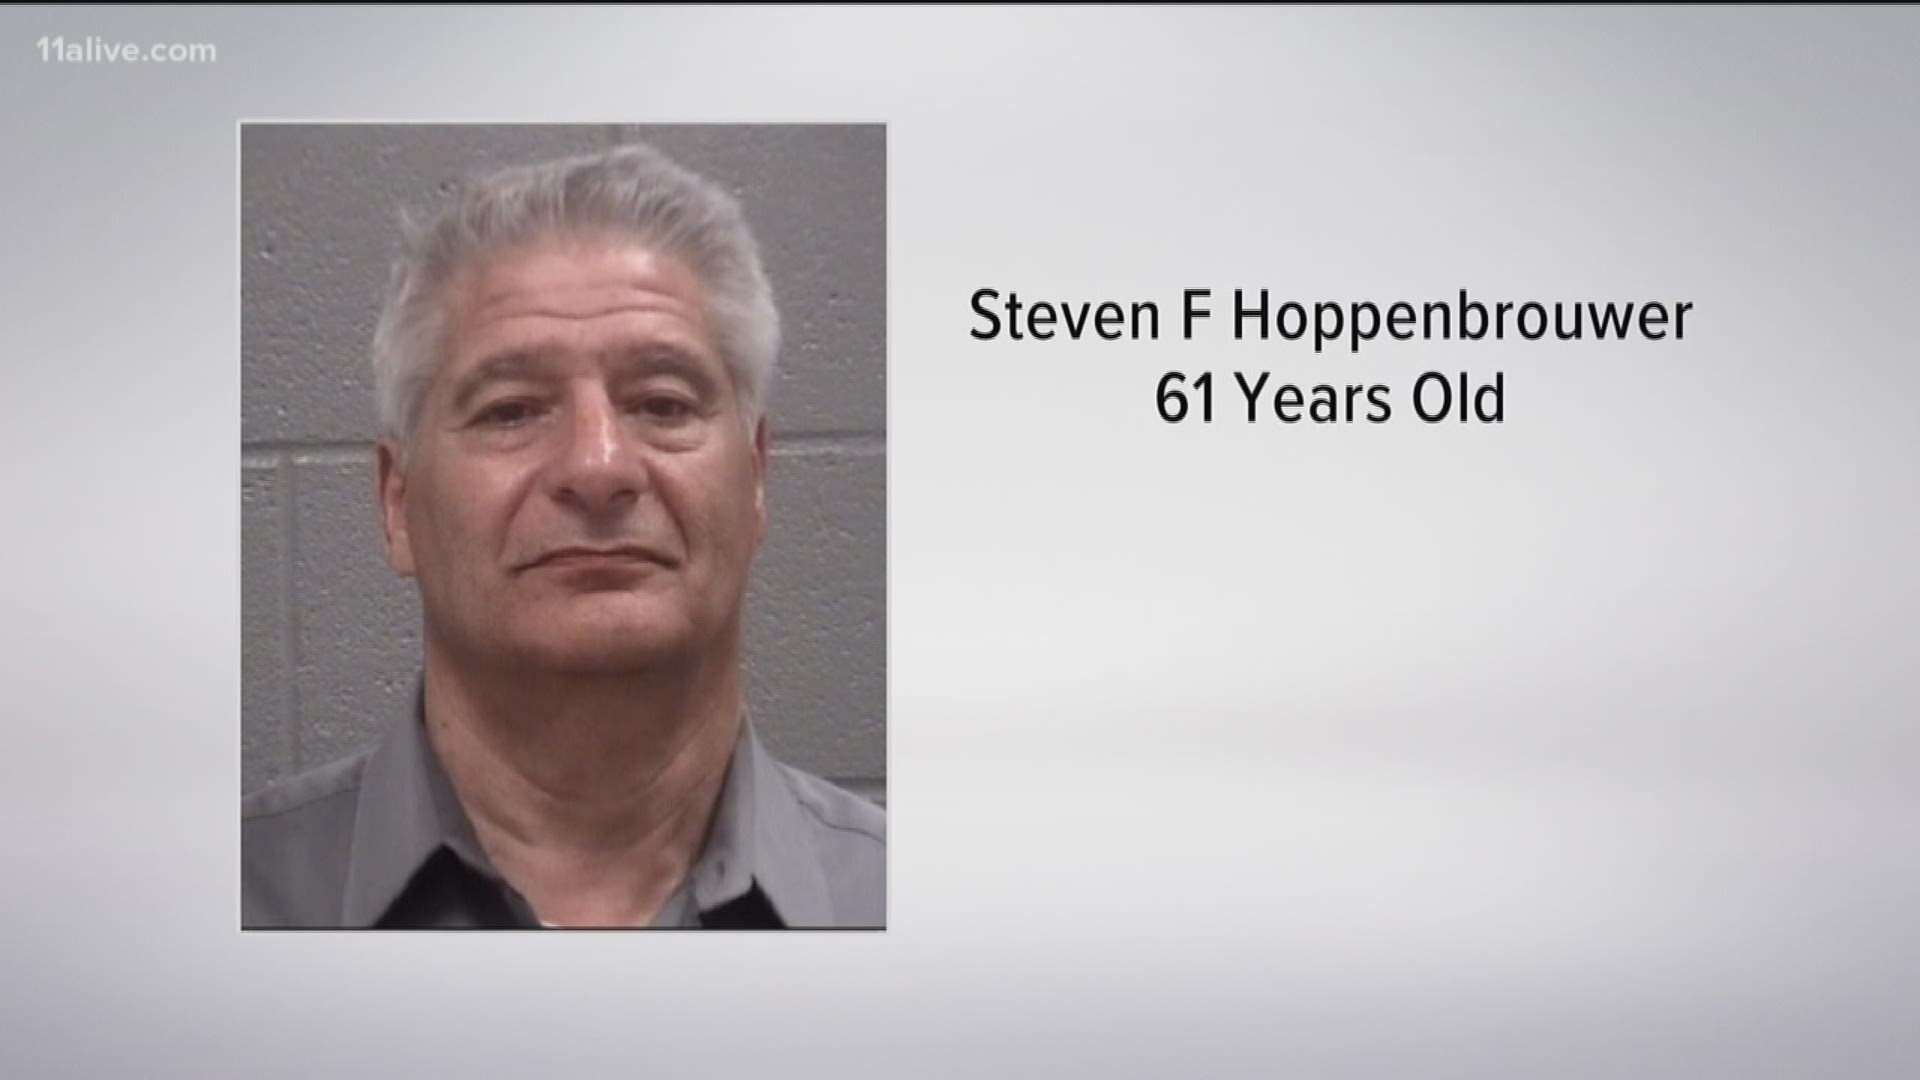 The Georgia State Patrol later confirmed that the driver of the bus, 61-year-old Steven F. Hoppenbrouwer of Gwinnett County, Georgia, has been charged with driving under the influence of drugs and failure to maintain lane.